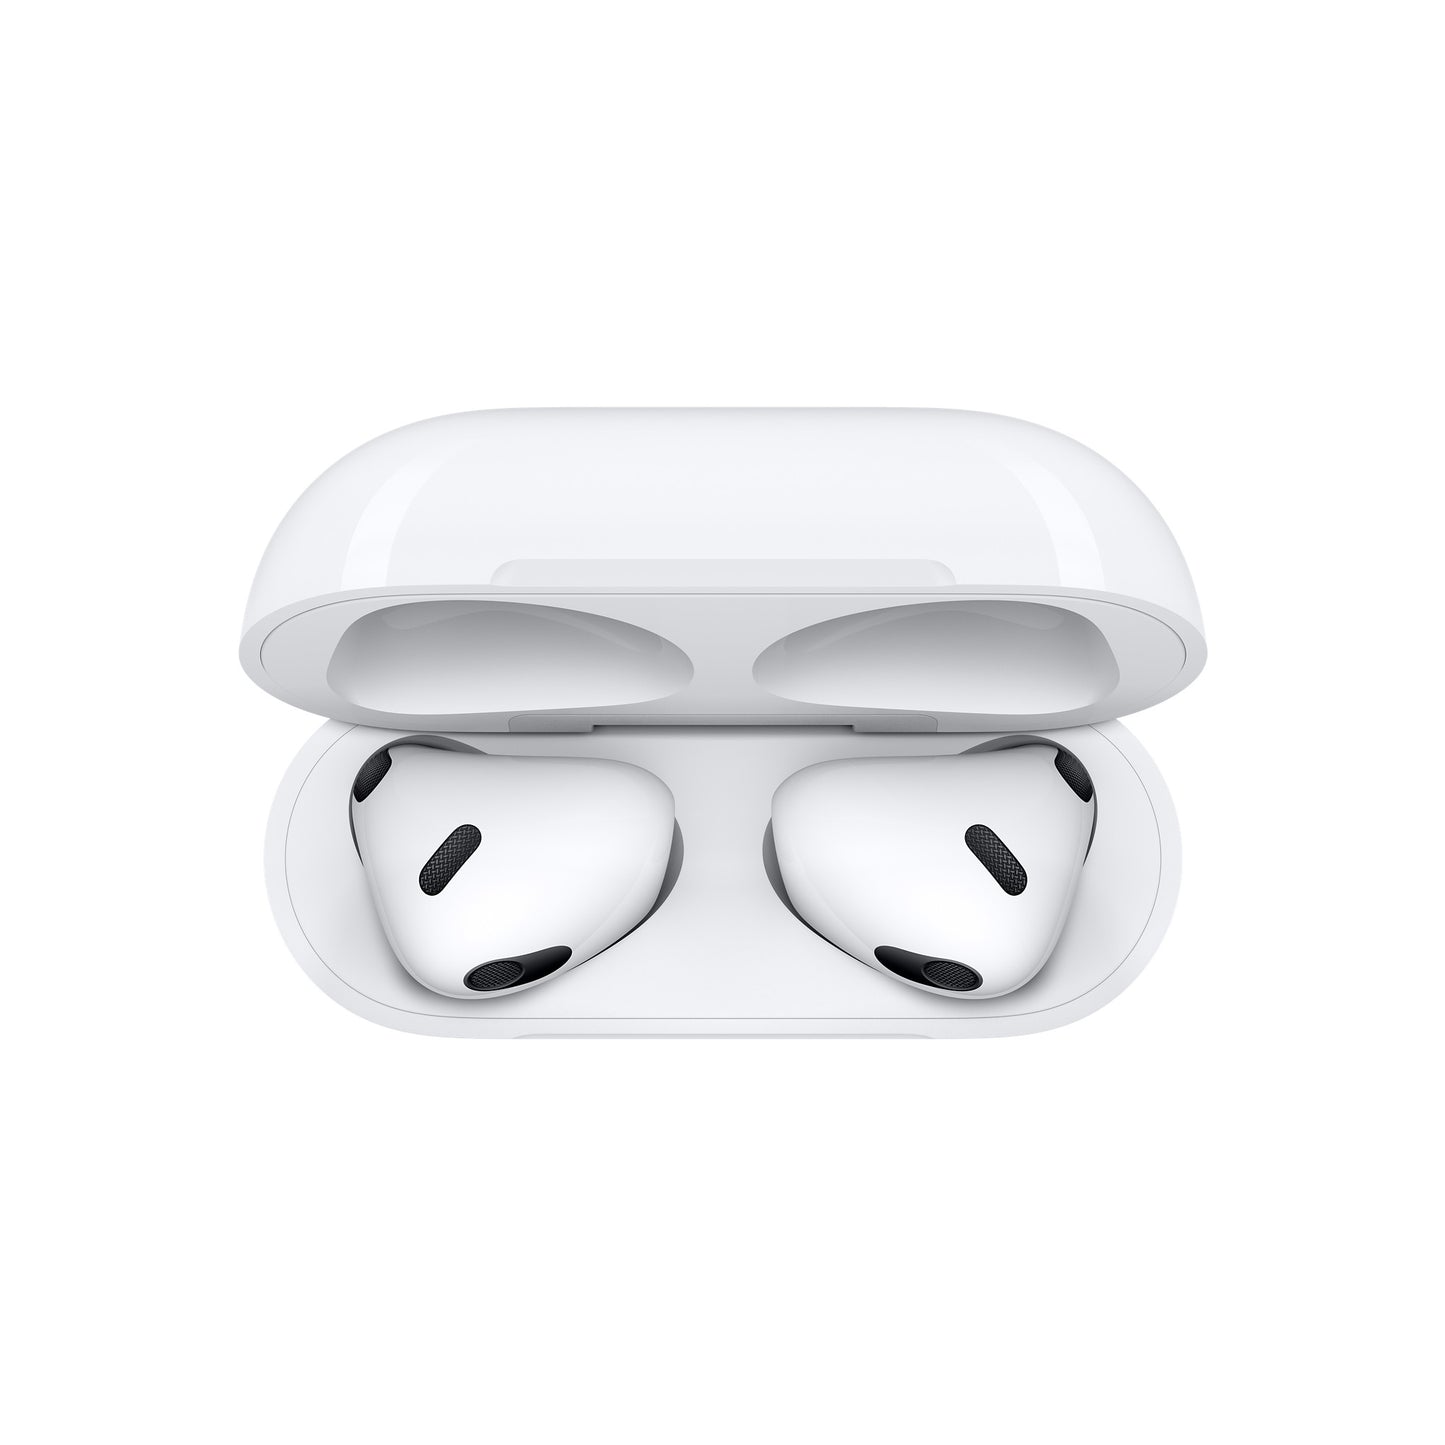 Apple AirPods (3rd generation) with Lightning Charging Case brand new